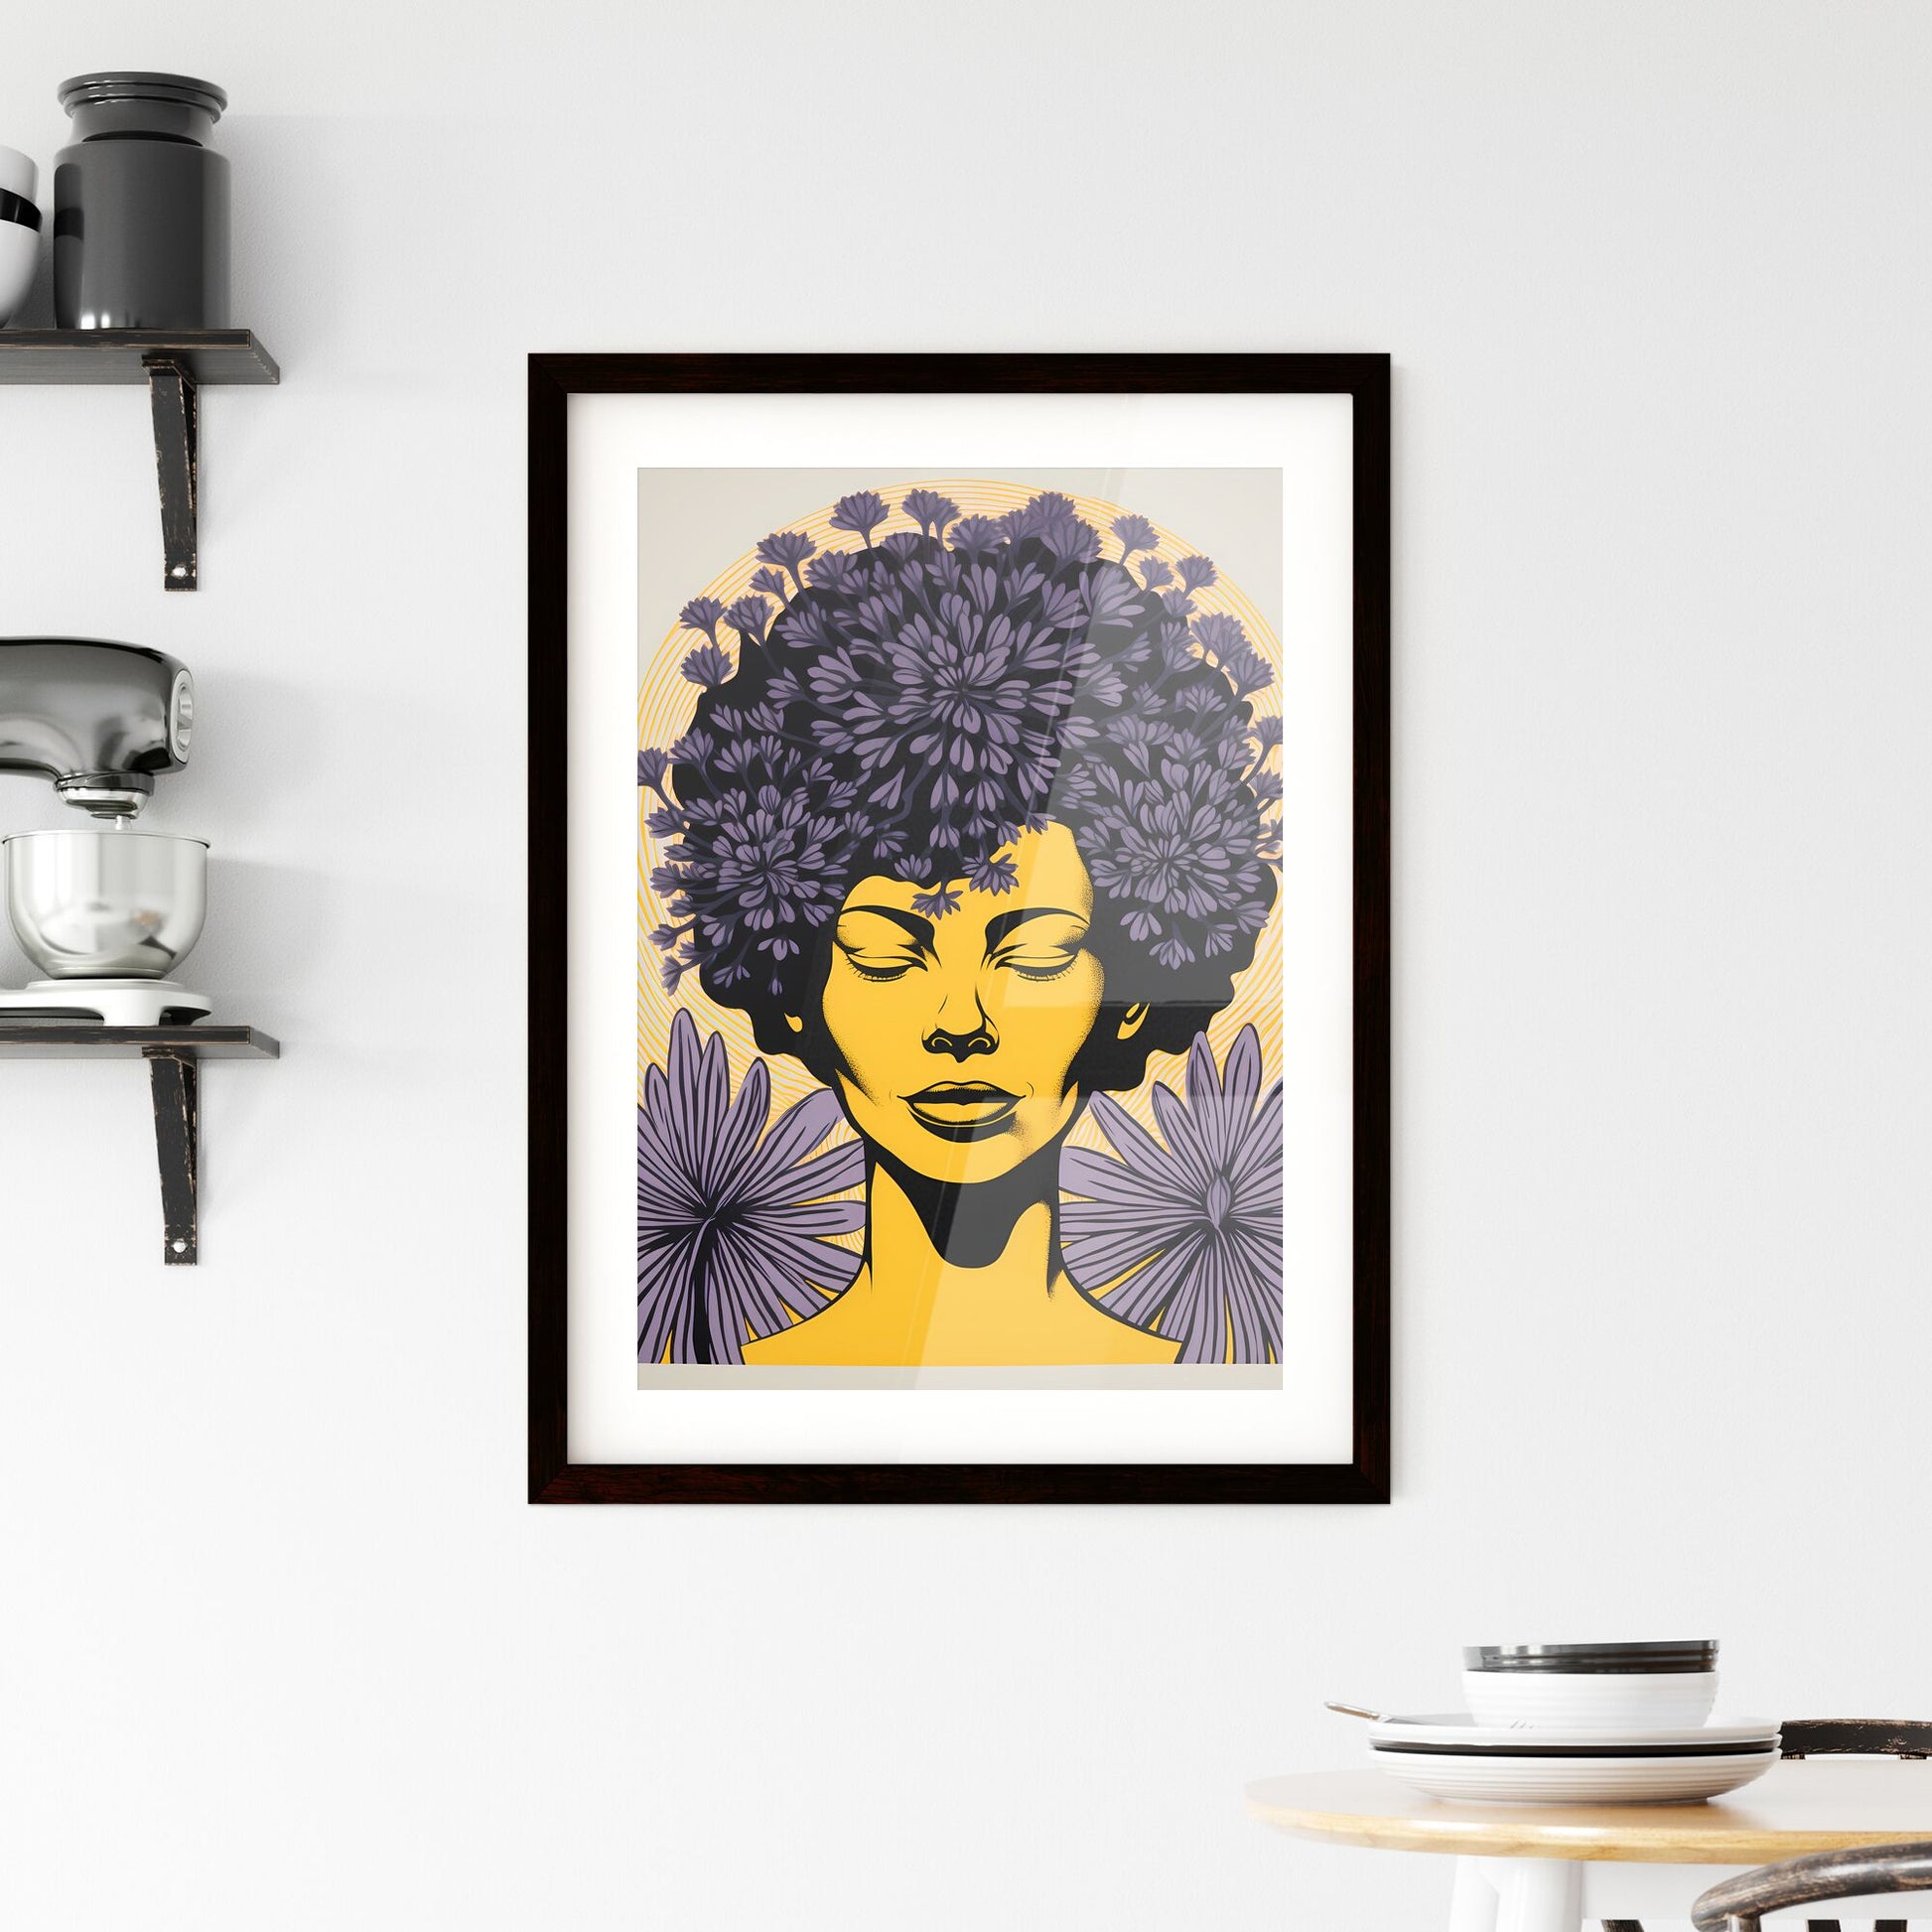 A Poster of Linocut Print Minimalism - A Poster Of A Woman With Purple Flowers Default Title